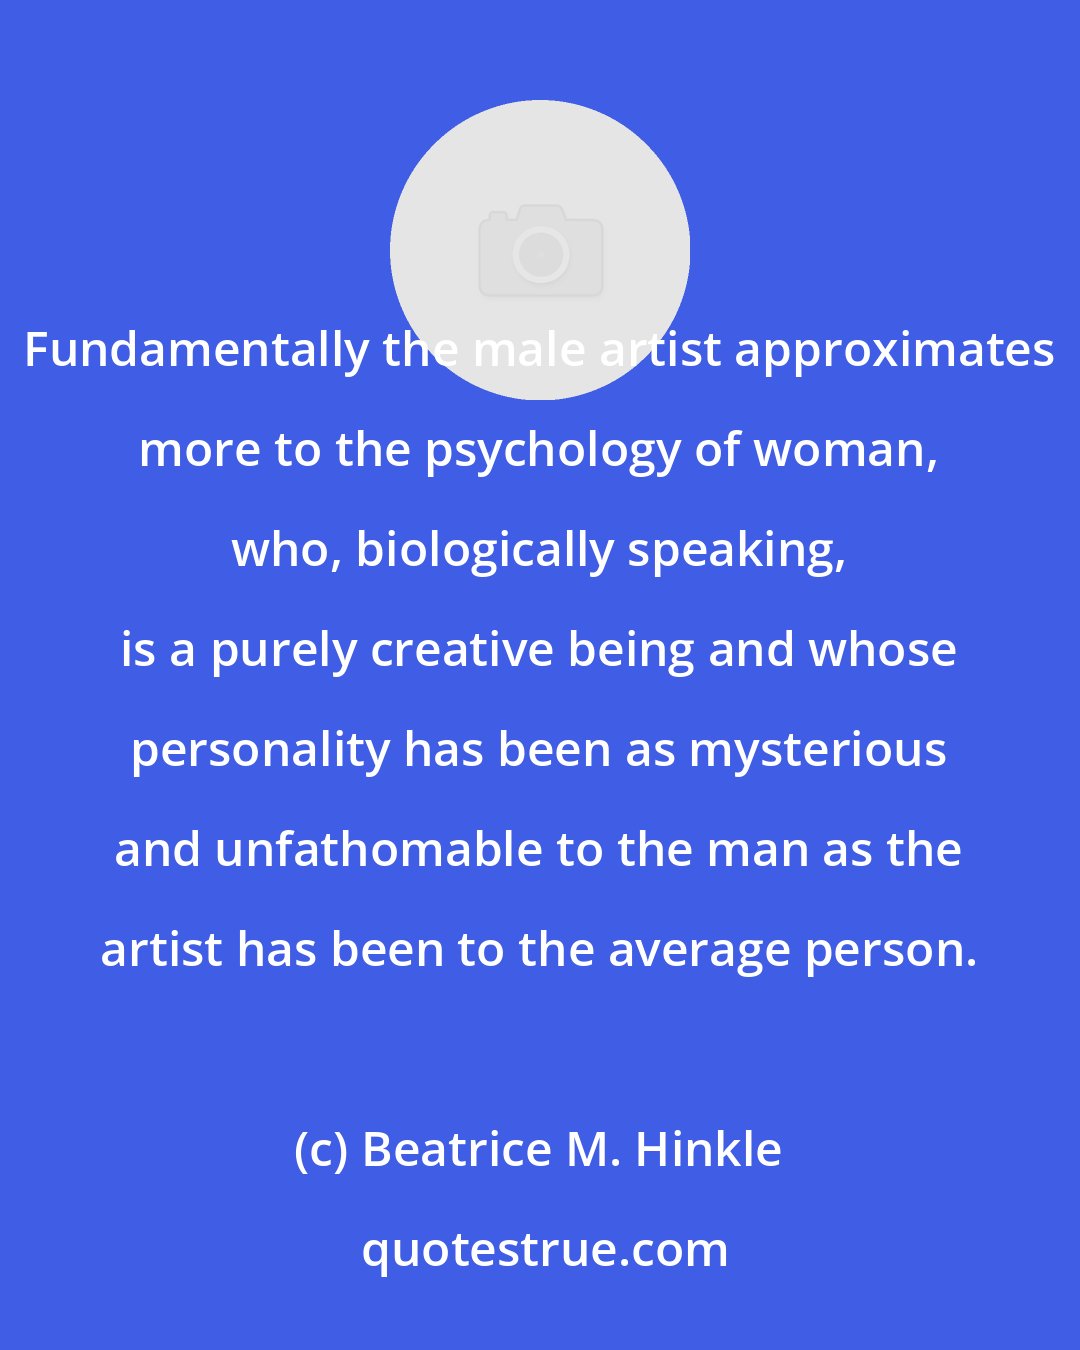 Beatrice M. Hinkle: Fundamentally the male artist approximates more to the psychology of woman, who, biologically speaking, is a purely creative being and whose personality has been as mysterious and unfathomable to the man as the artist has been to the average person.